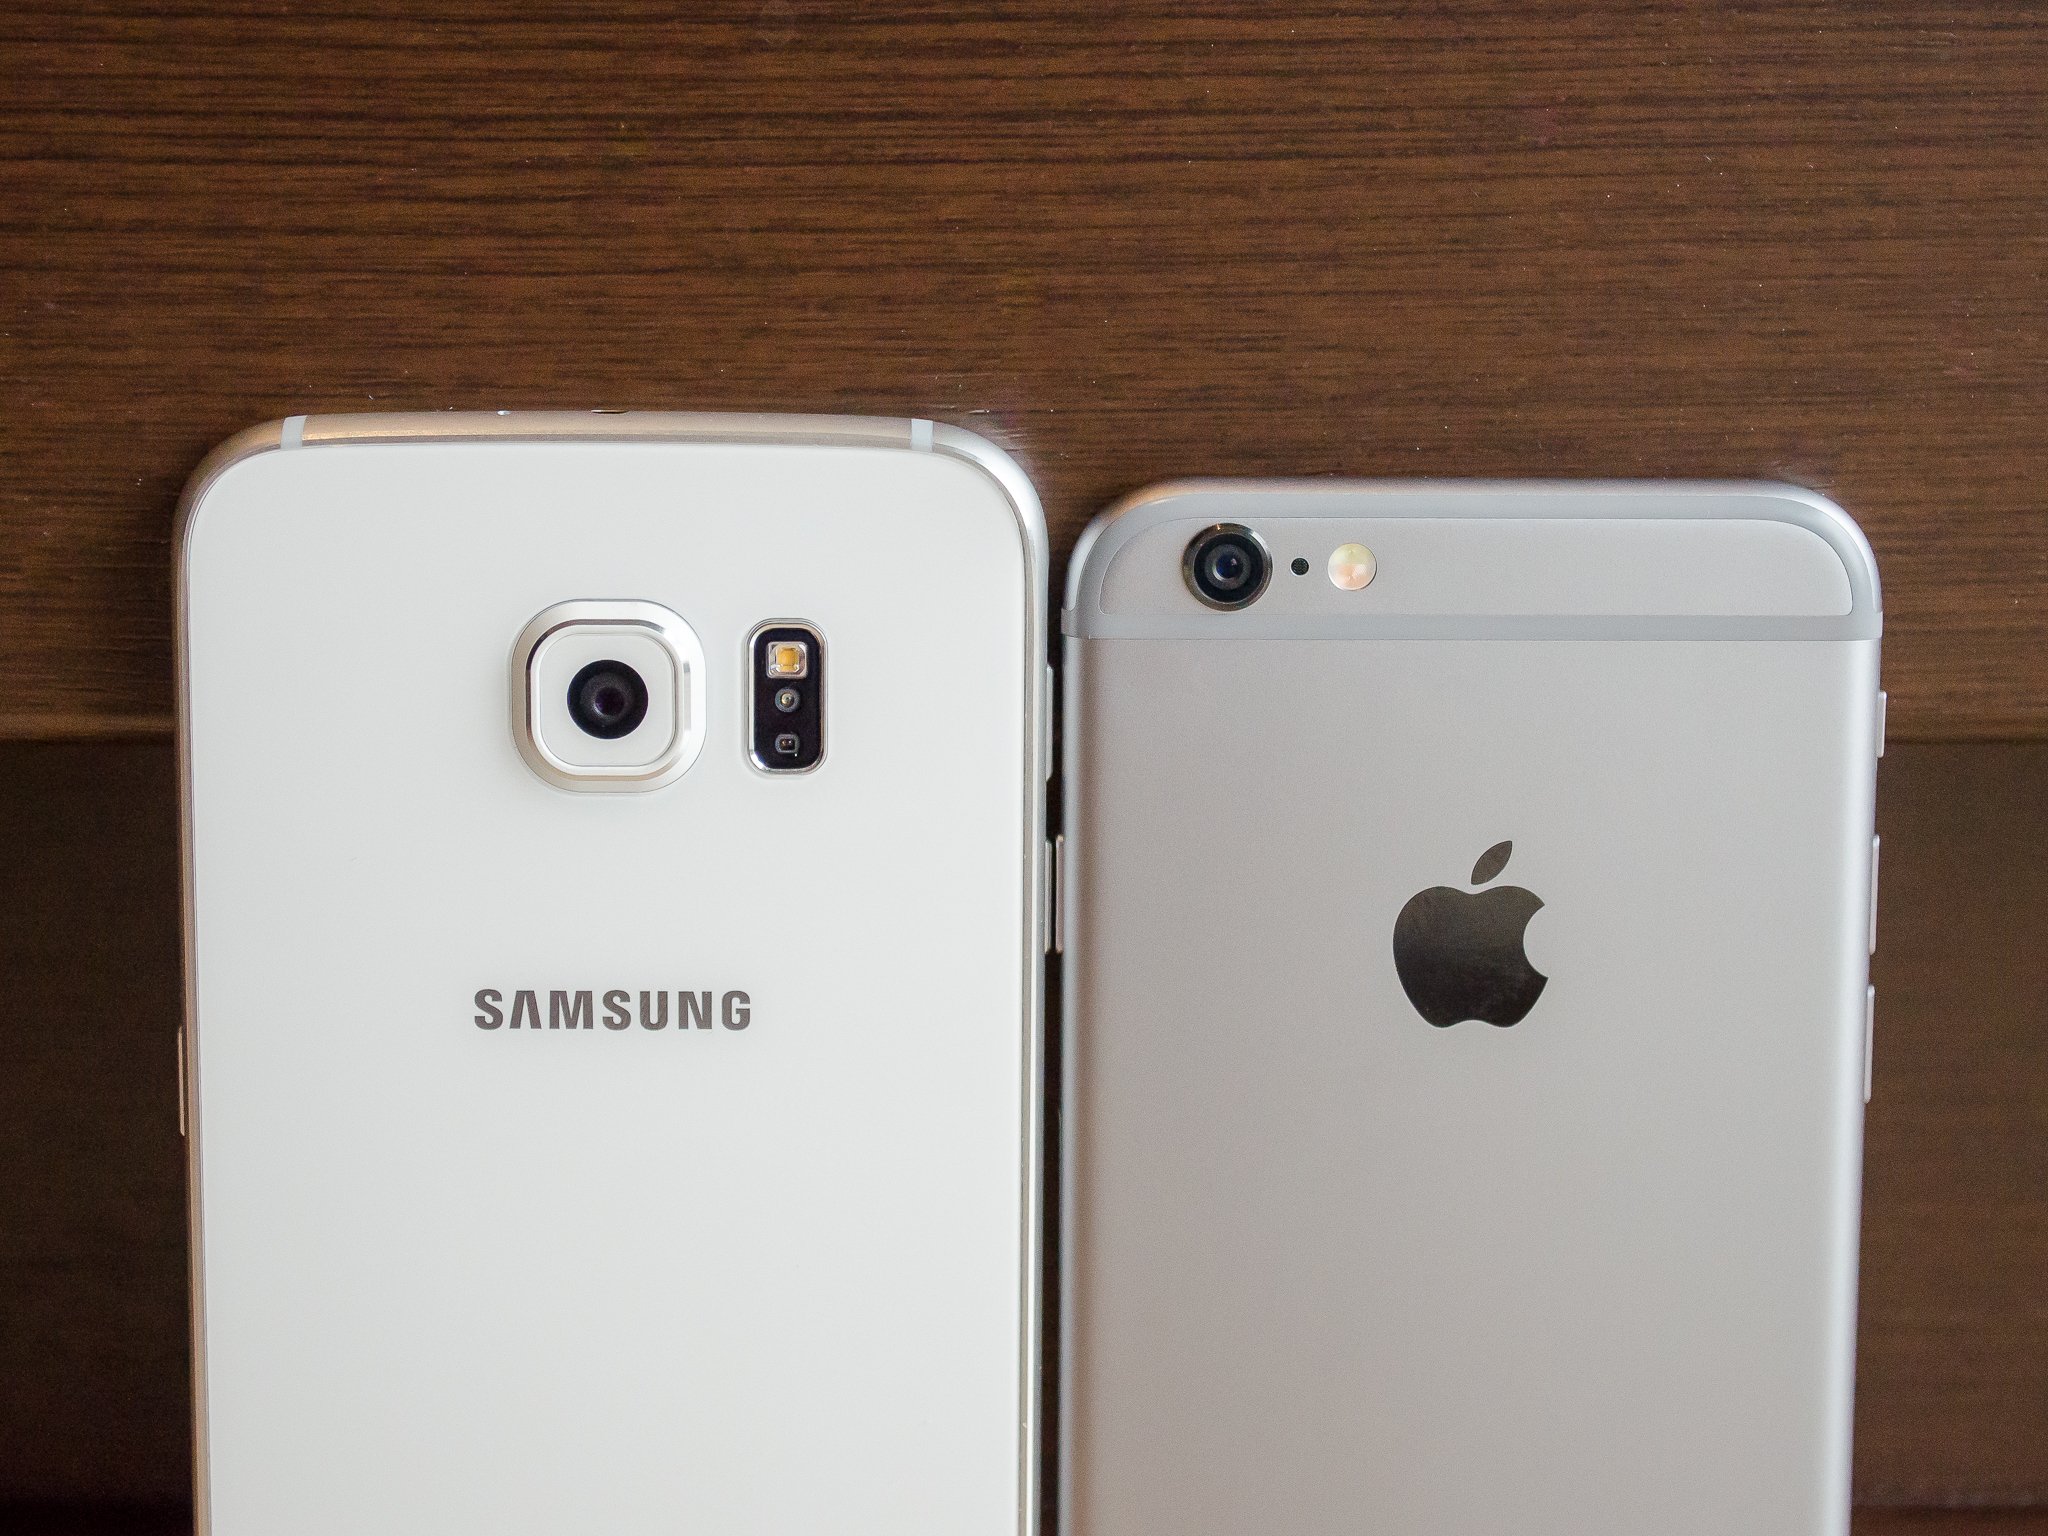 Galaxy S6 and iPhone 6